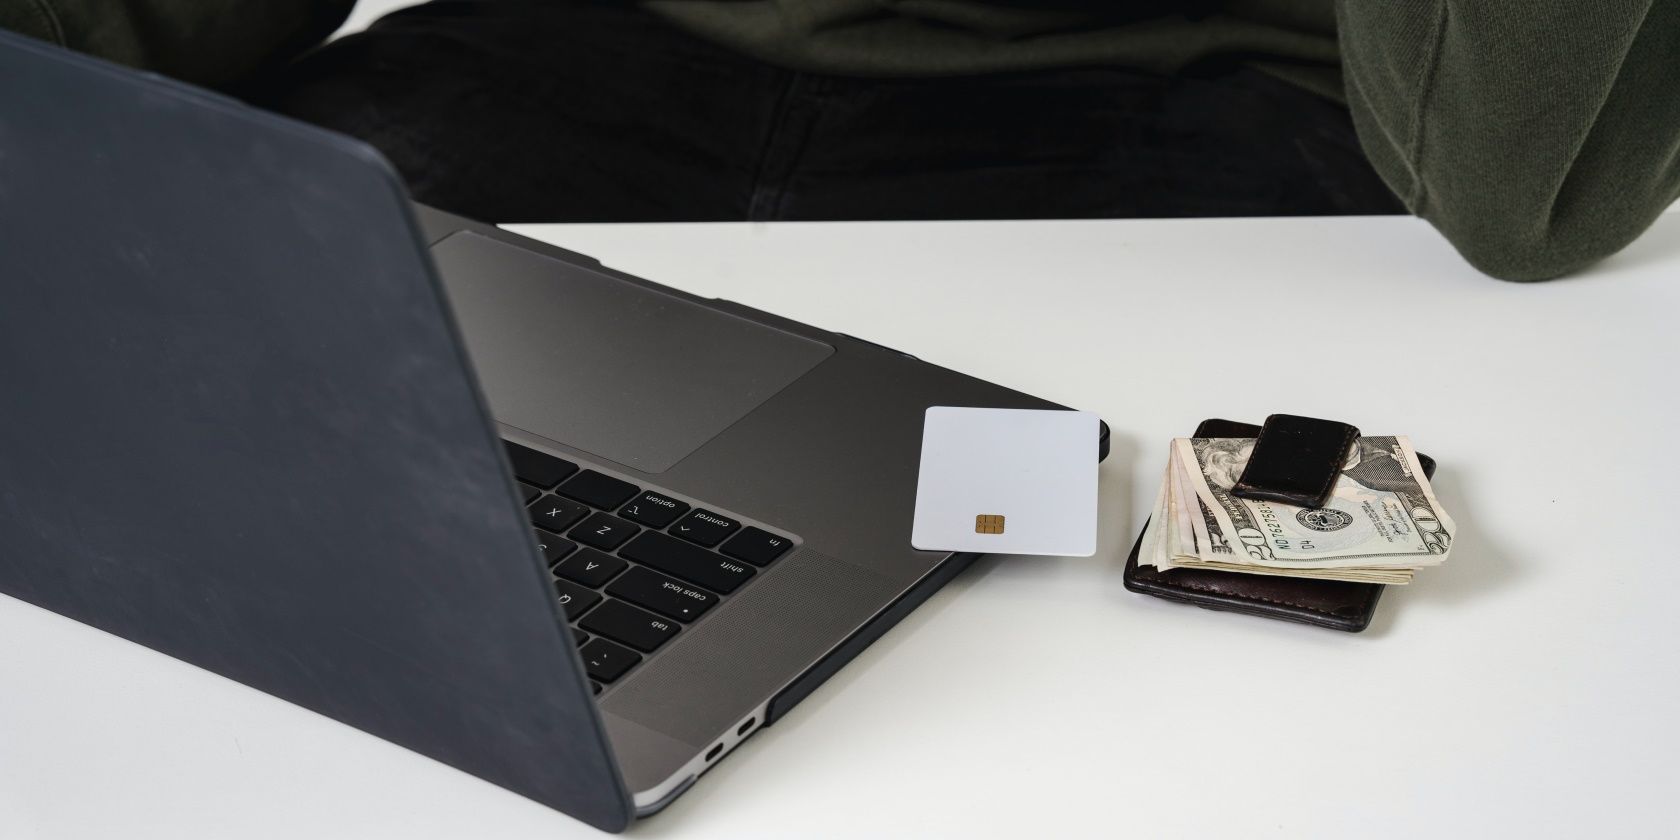 A MacBook, credit card and banknotes on a table.